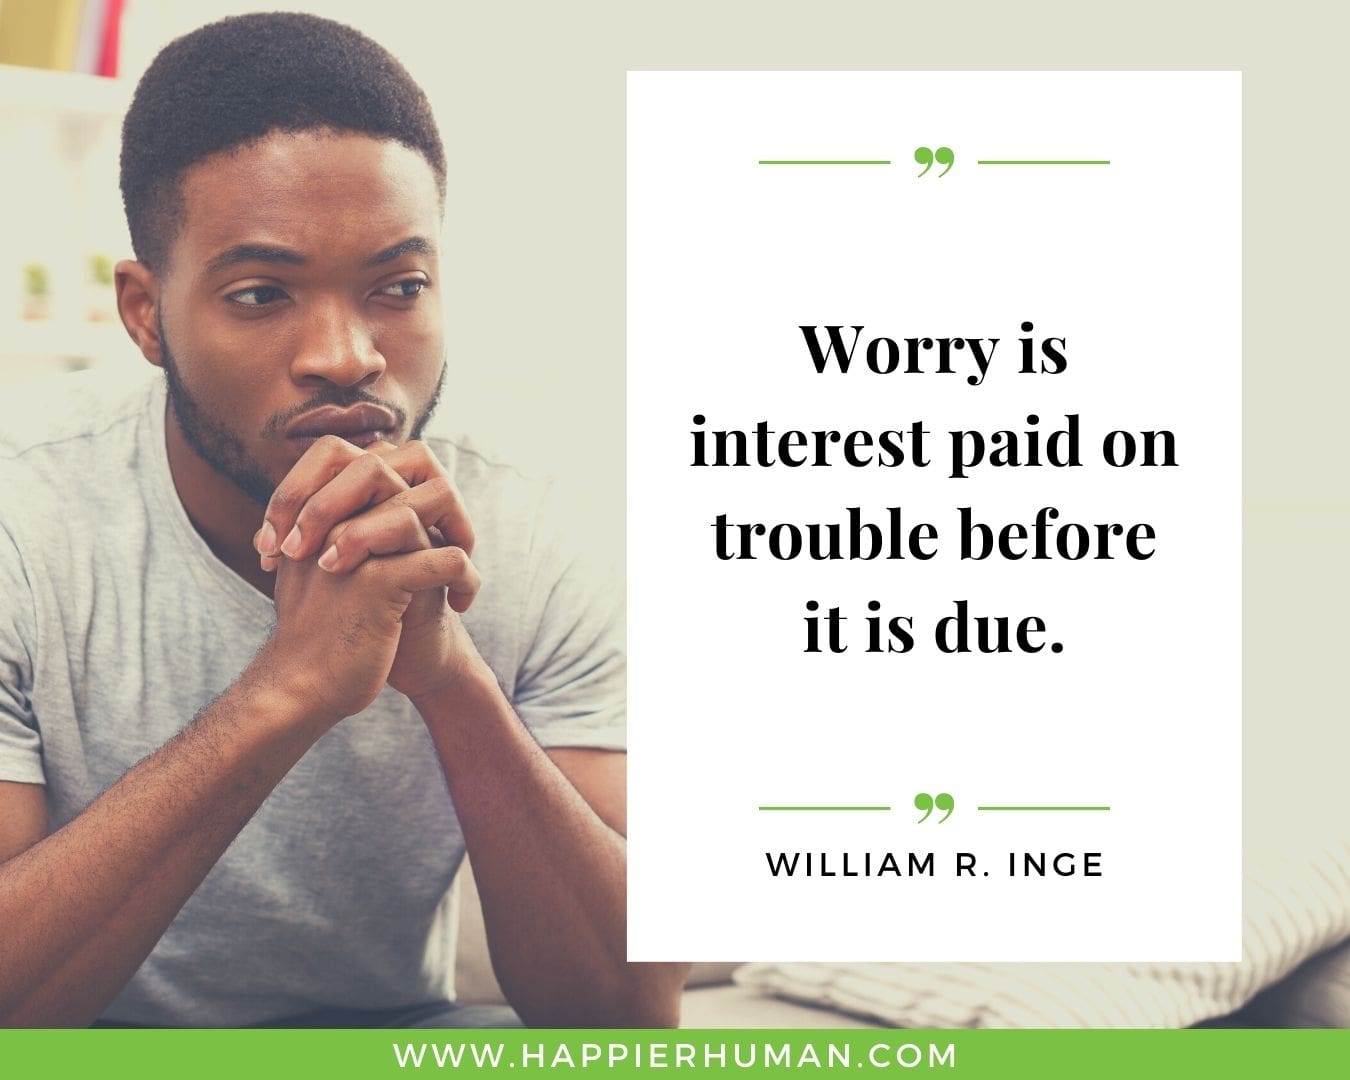 Overthinking Quotes - “Worry is interest paid on trouble before it is due.” - William R. Inge